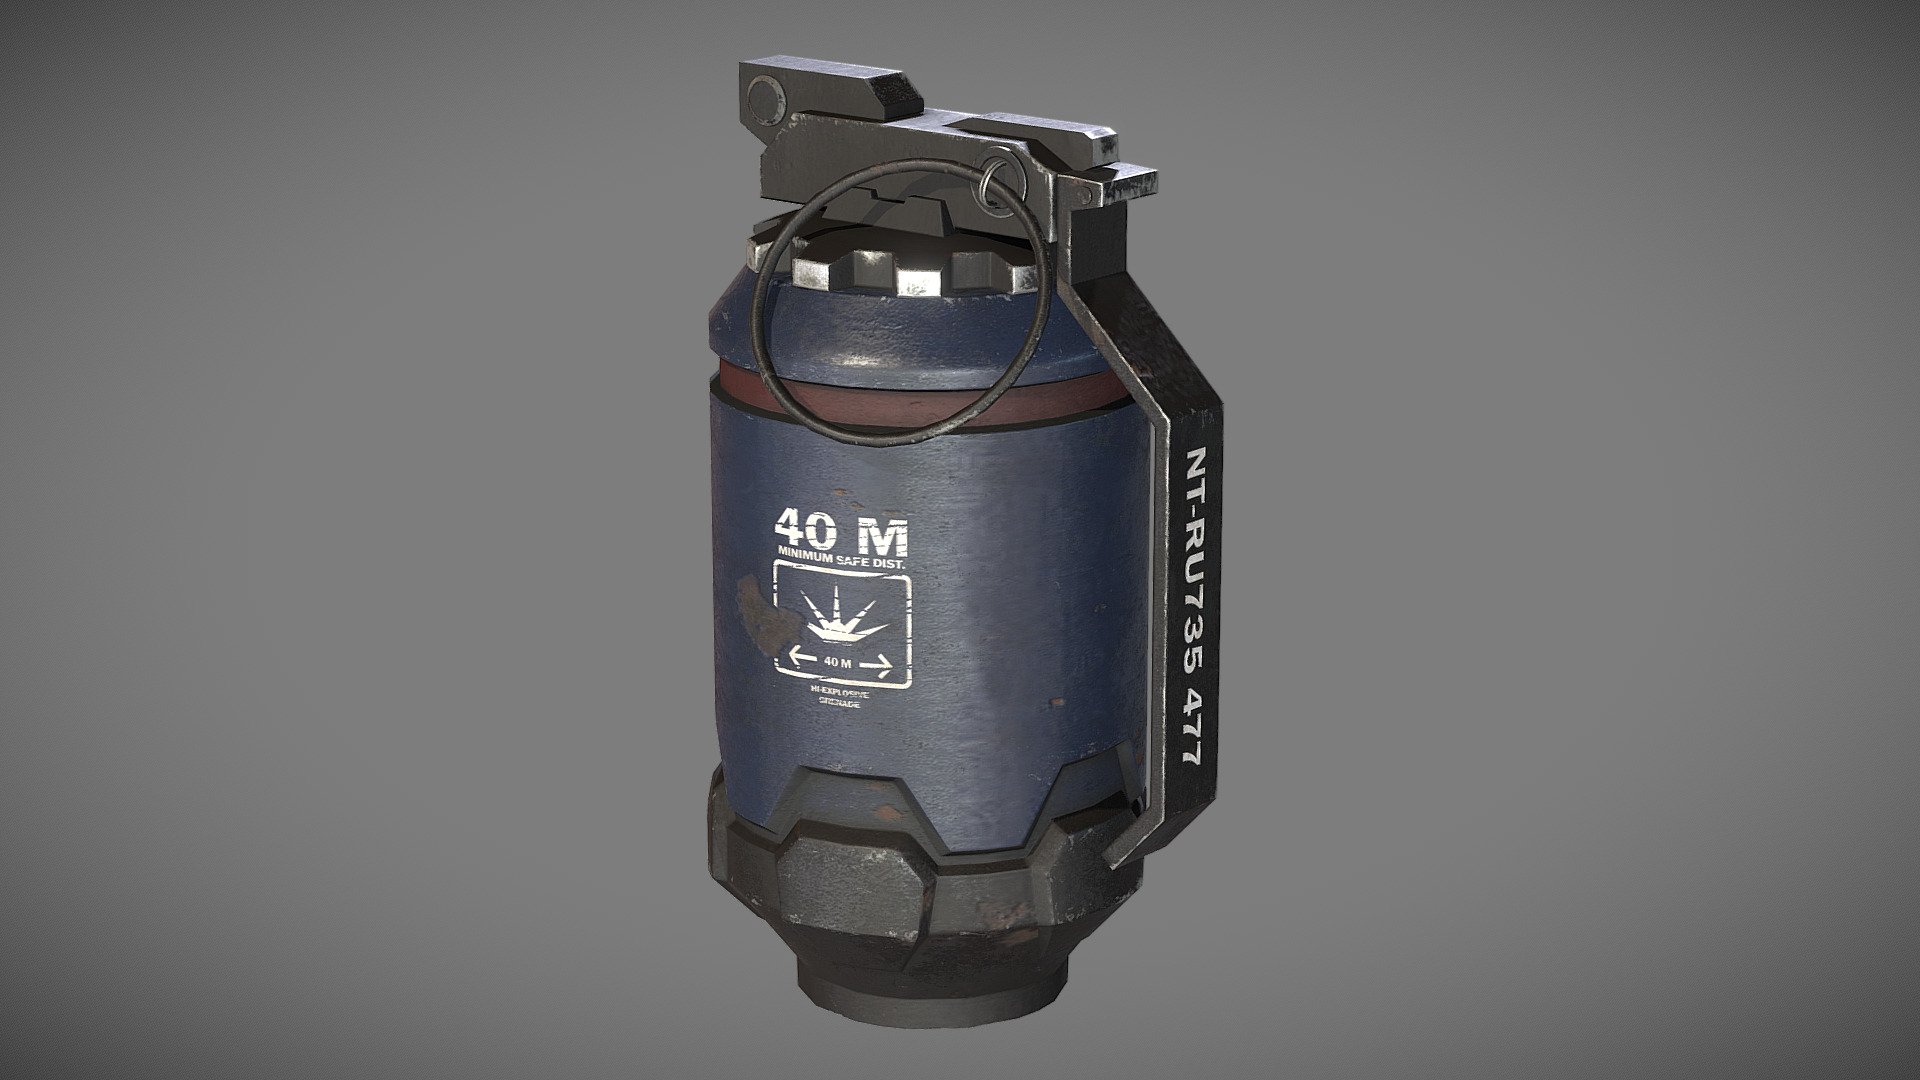 Created for the Polycount Monthly Environment Art Challenge - January &amp; February 2017 (46). Based on concept art by Ben Mauro 
https://i.kinja-img.com/gawker-media/image/upload/18uwikuos04jhjpg.jpg

This is my second attempt at texturing this grenade. The first time I used only Photoshop. This one was textrued using Substance Painter 3d model